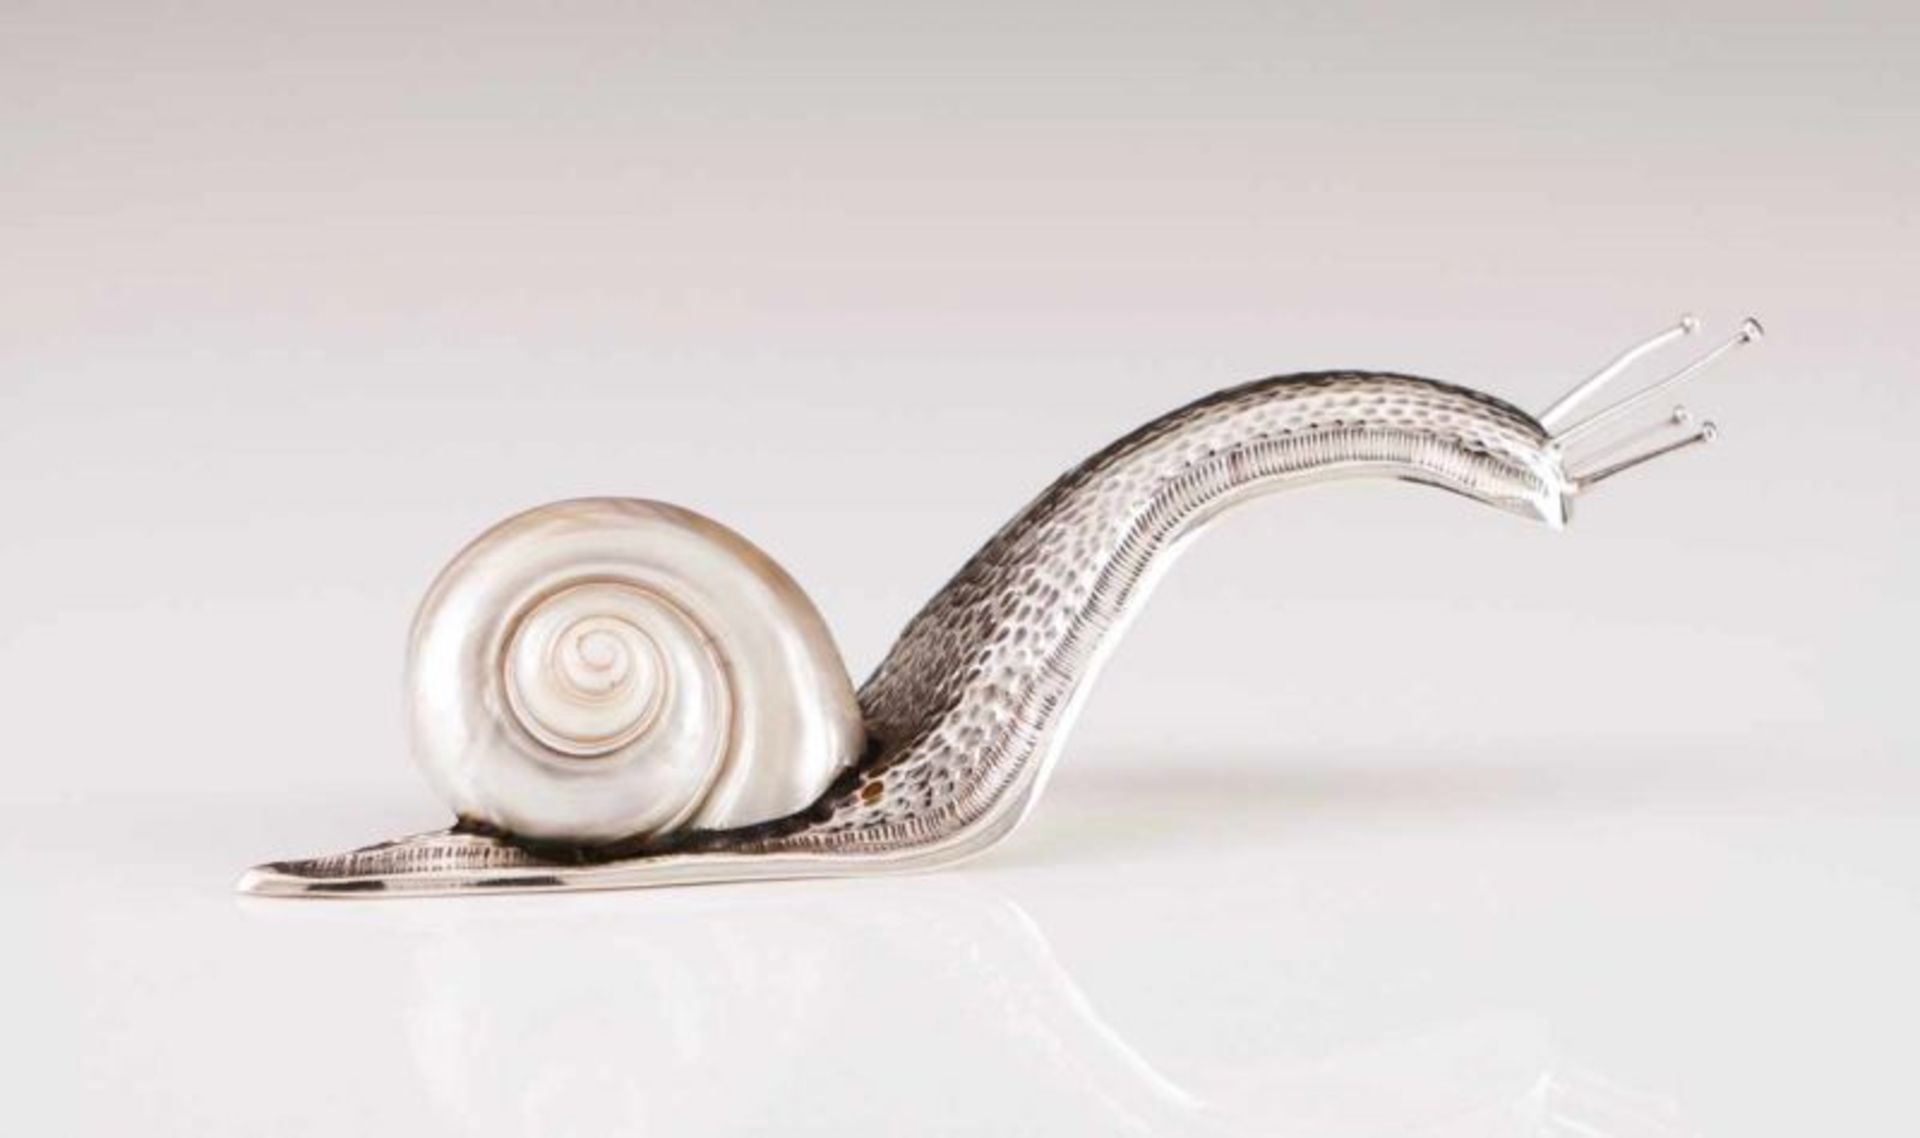 A snail, MANUEL ALCINO A portuguese silver sculpture Hammered decoration and nautilus shell Porto